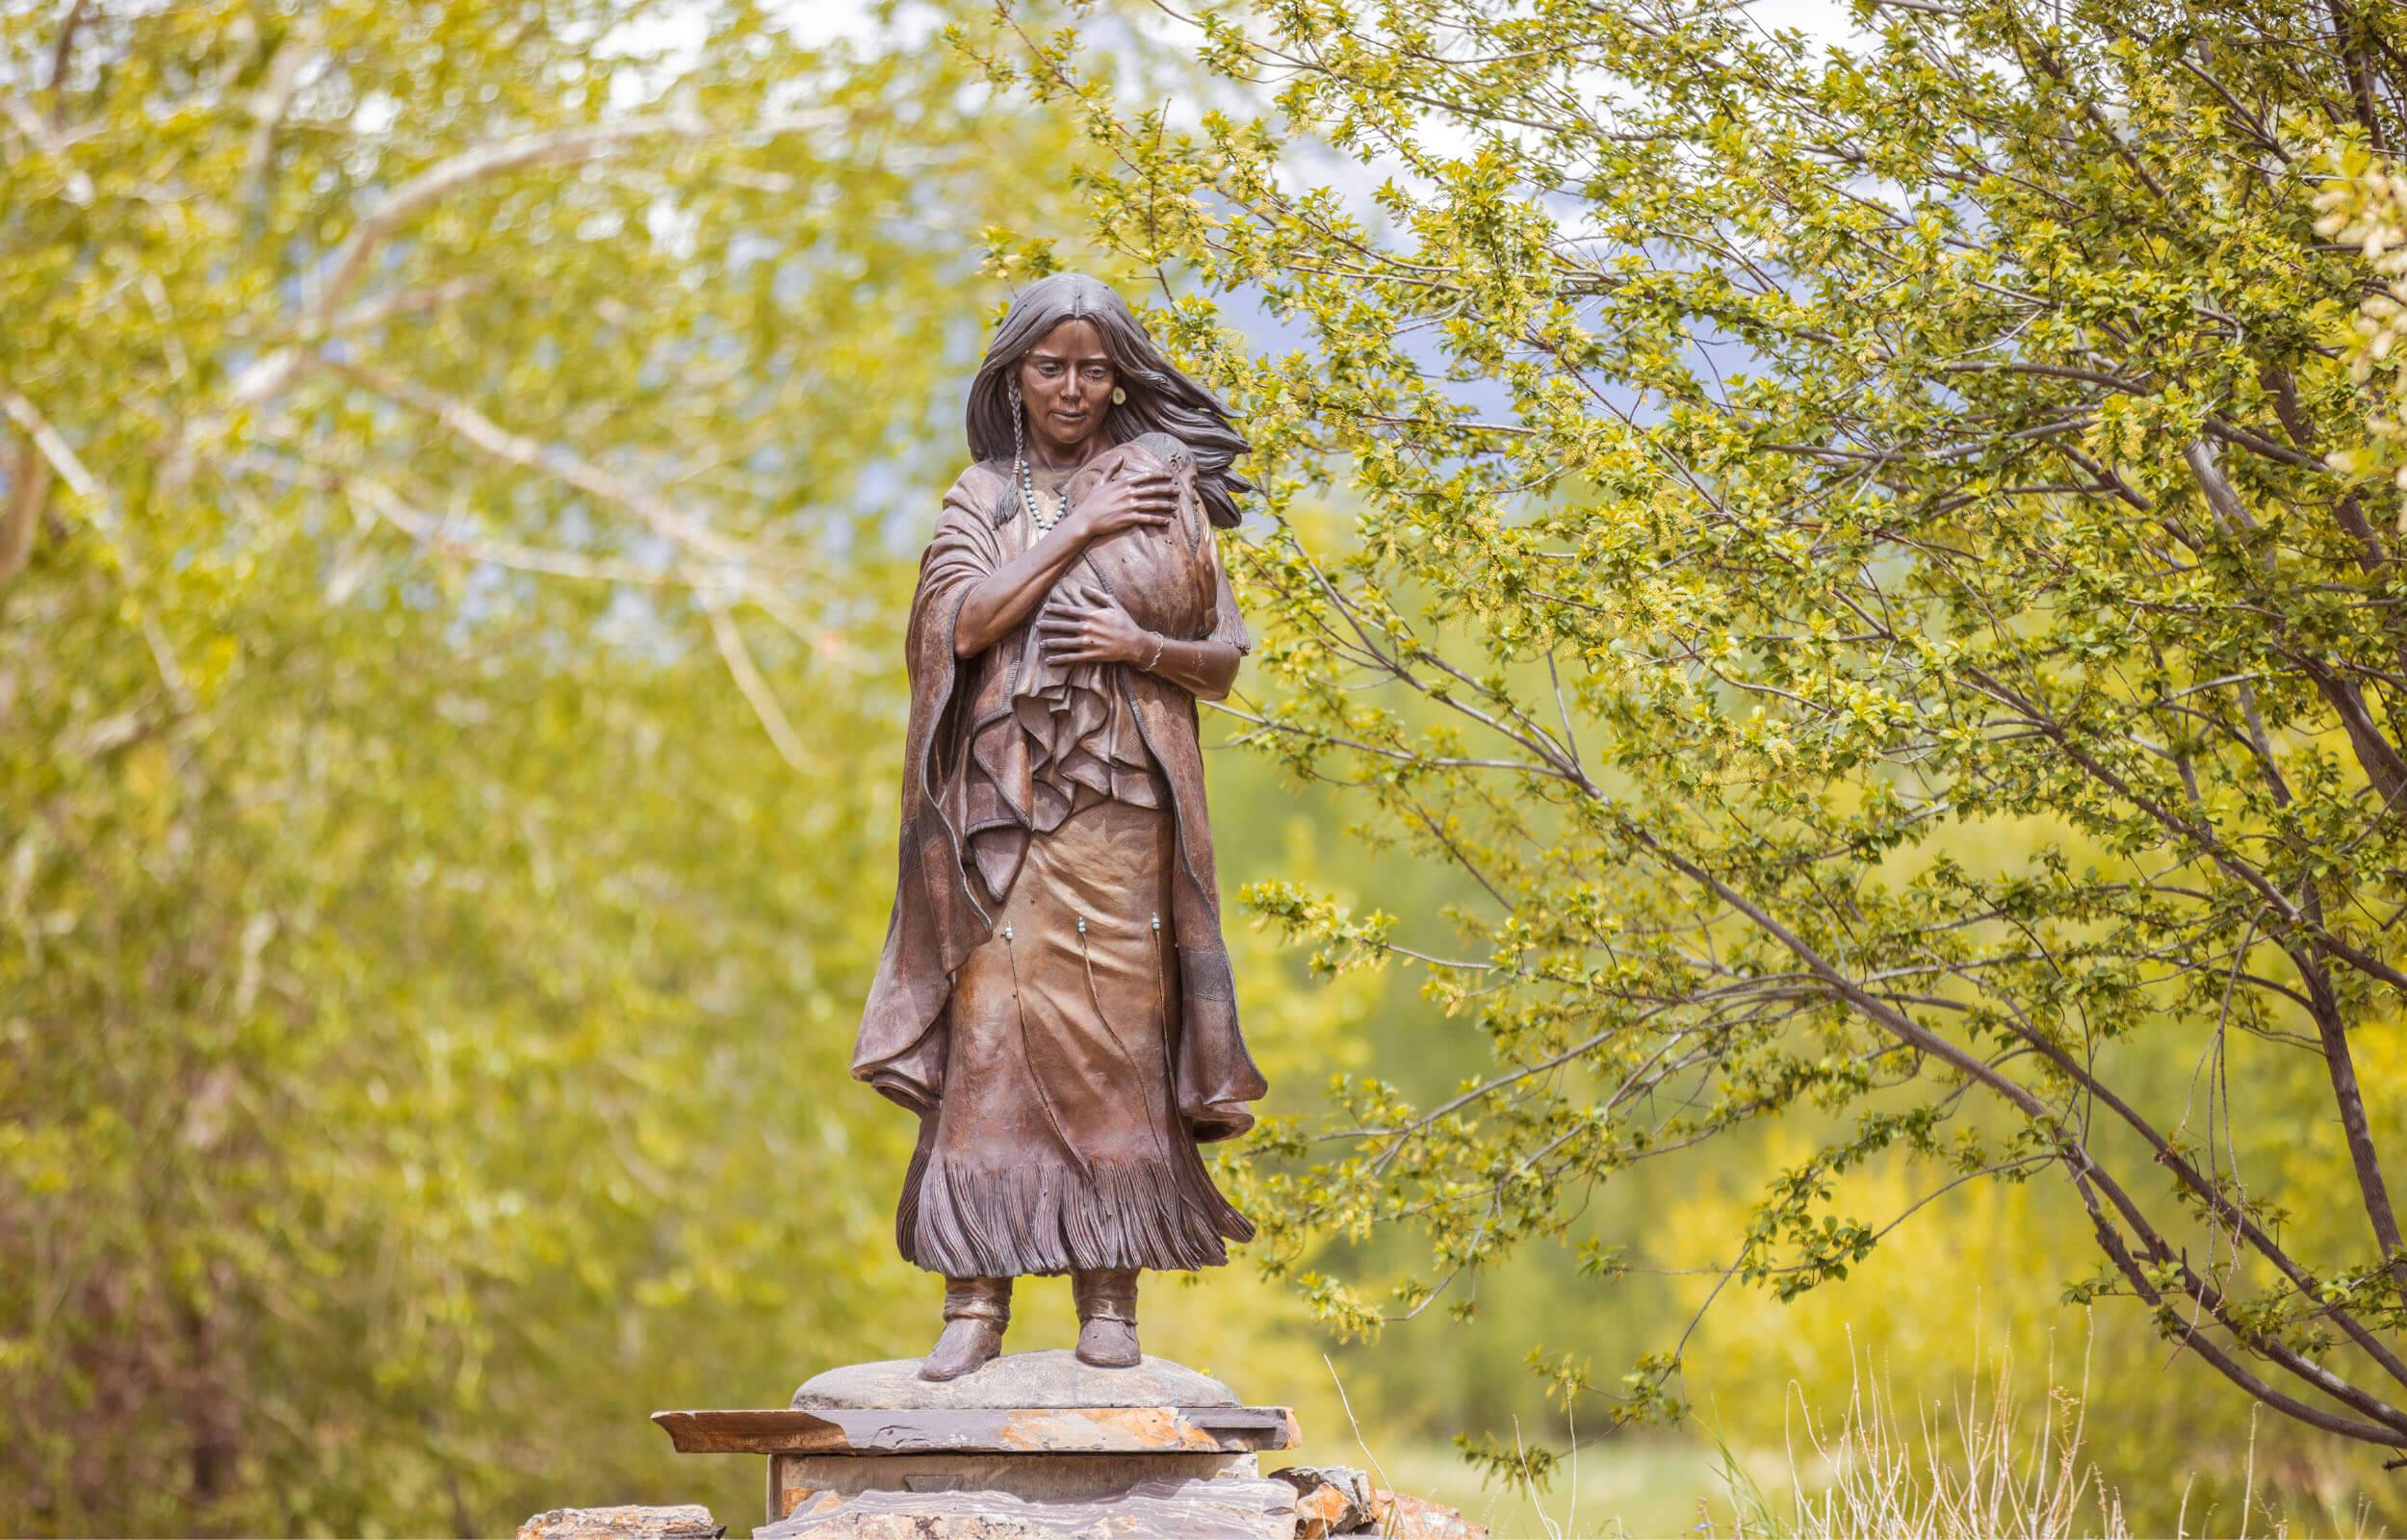 A bronze statue of Sacajawea holding a baby at the Sacajawea Interpretive, Cultural, and Educational Center.